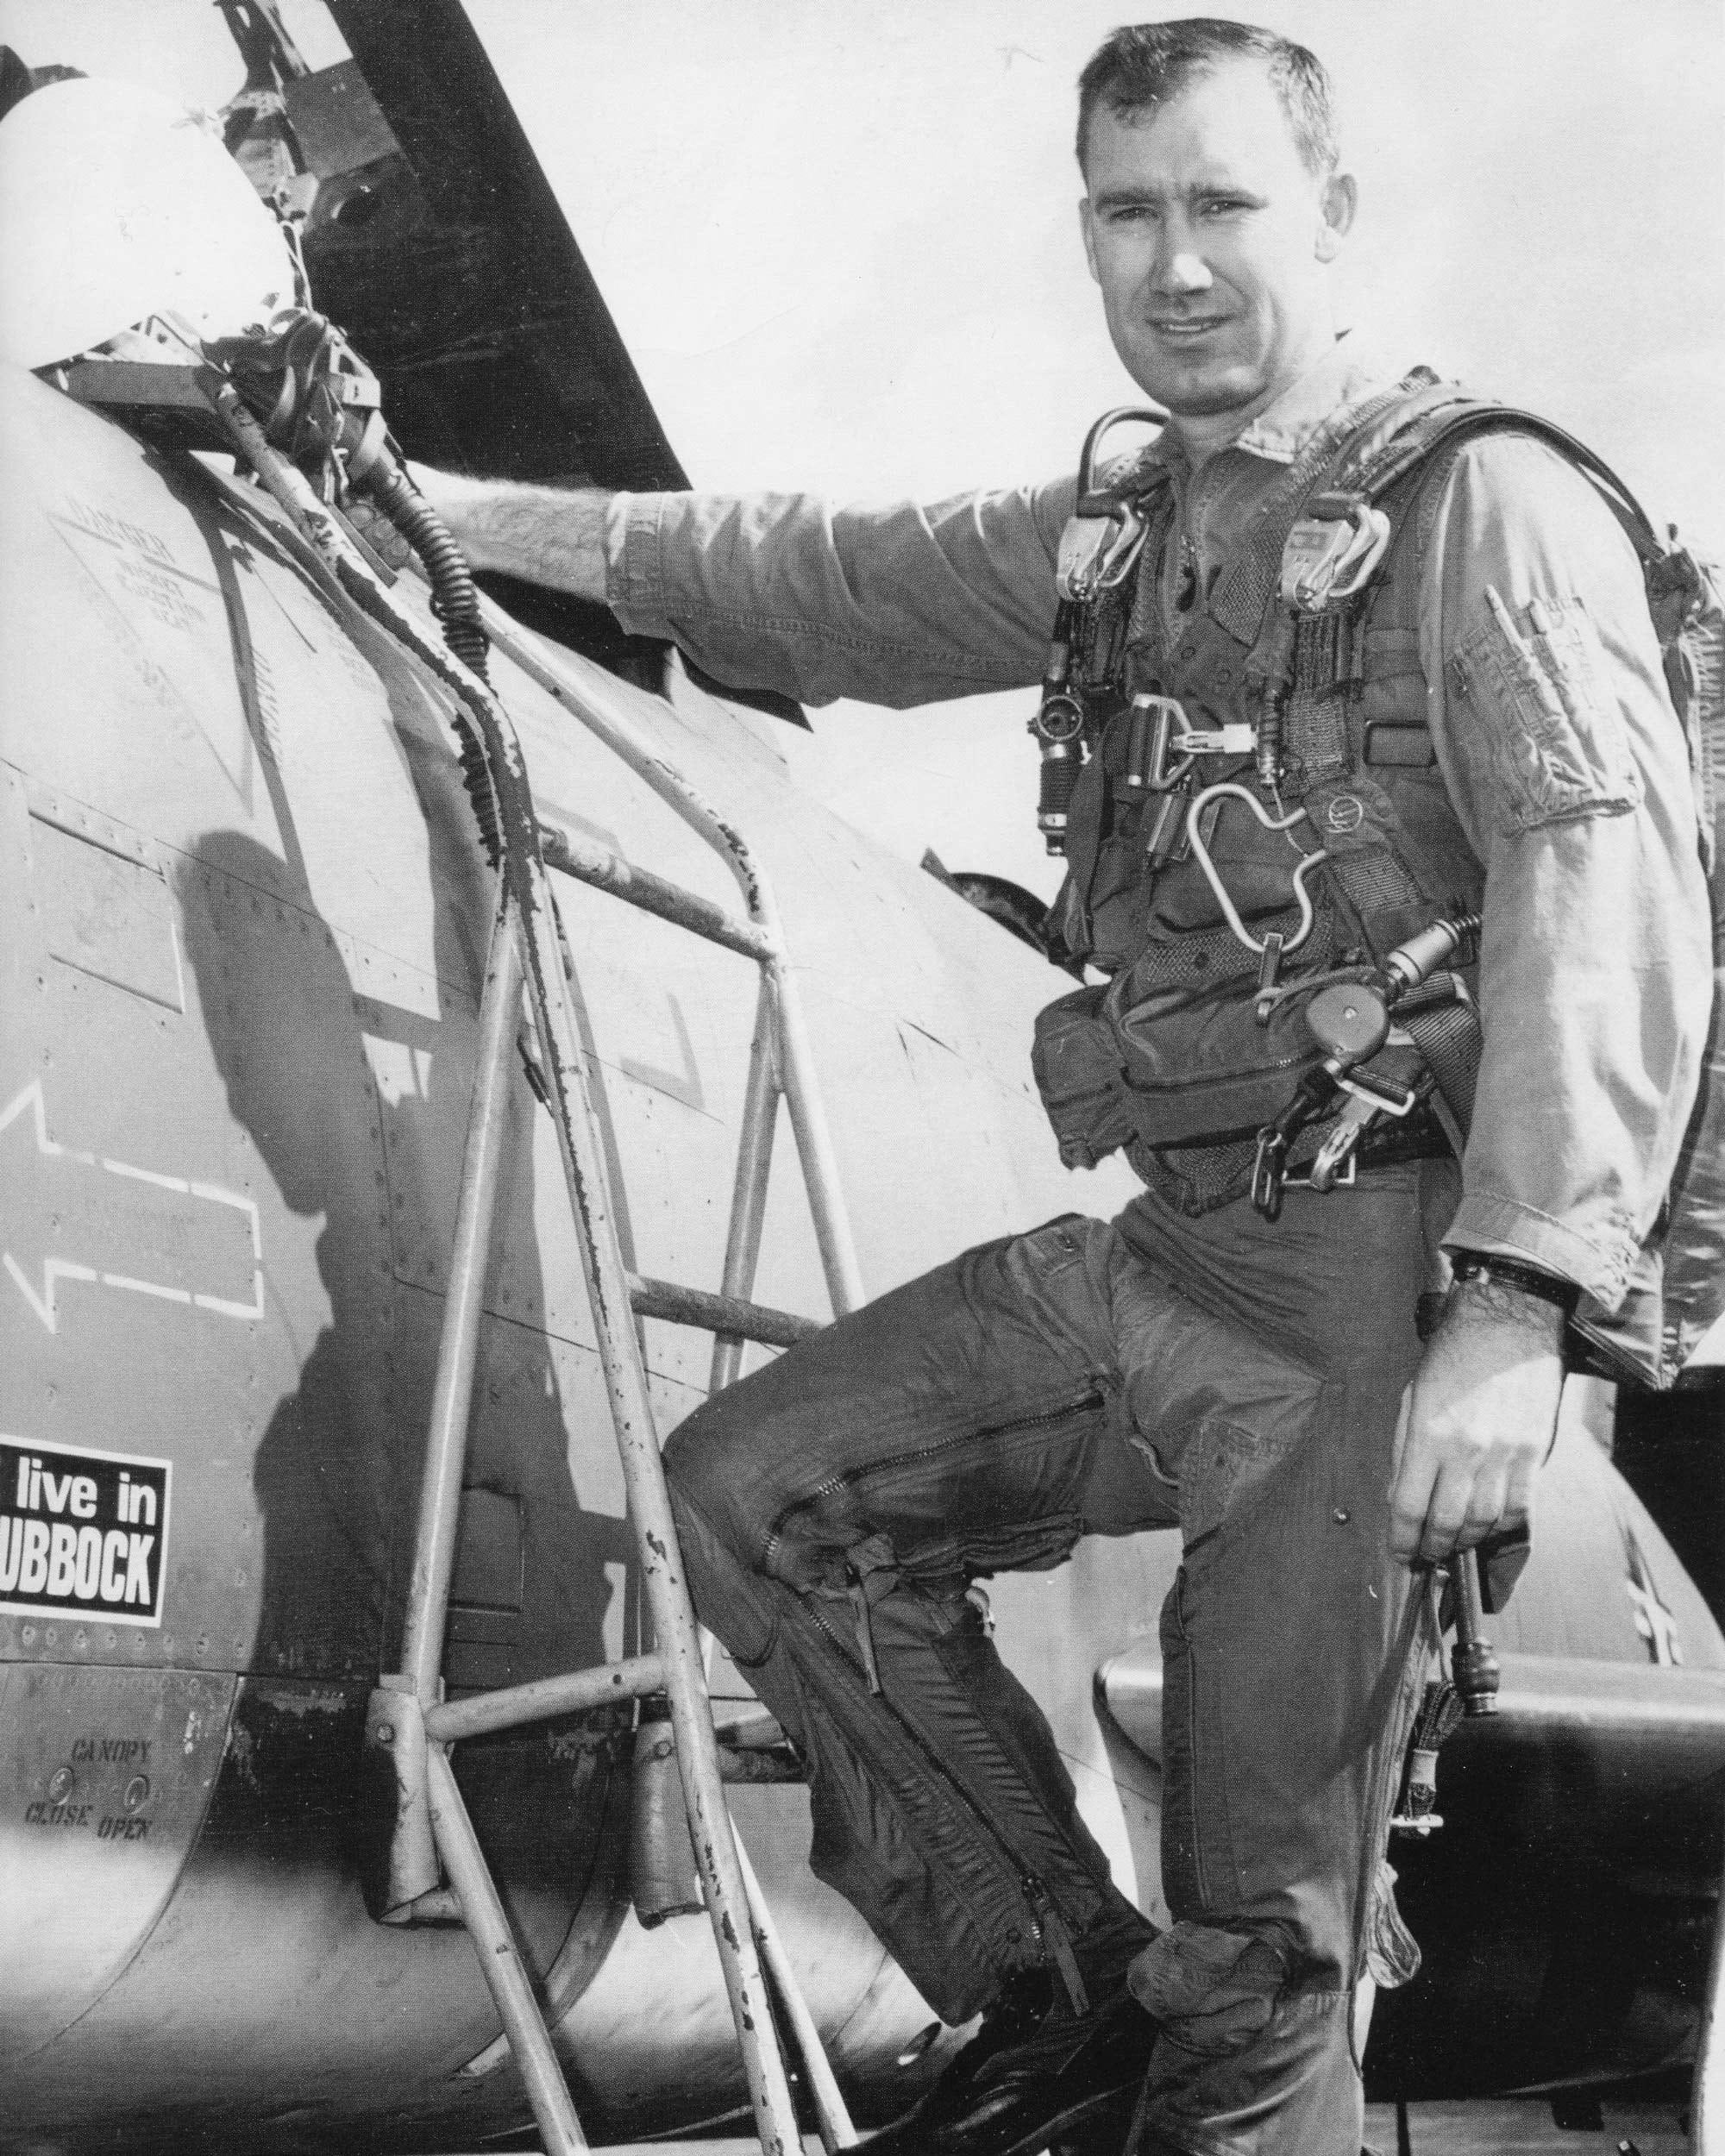 Fenn flew over 300 combat missions as a pilot during the Vietnam War.